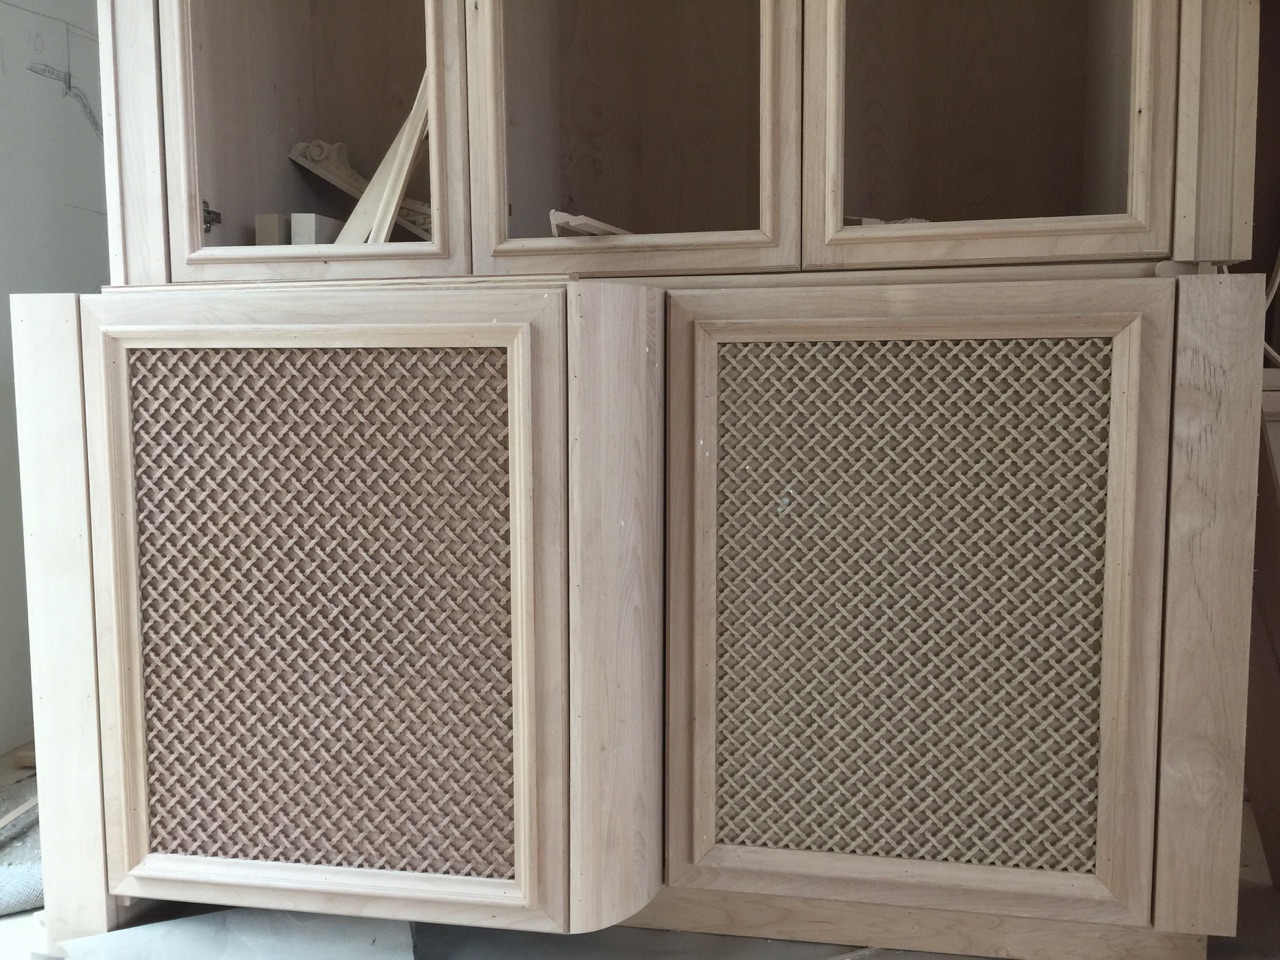 Custom Grilles As Cabinet Inserts